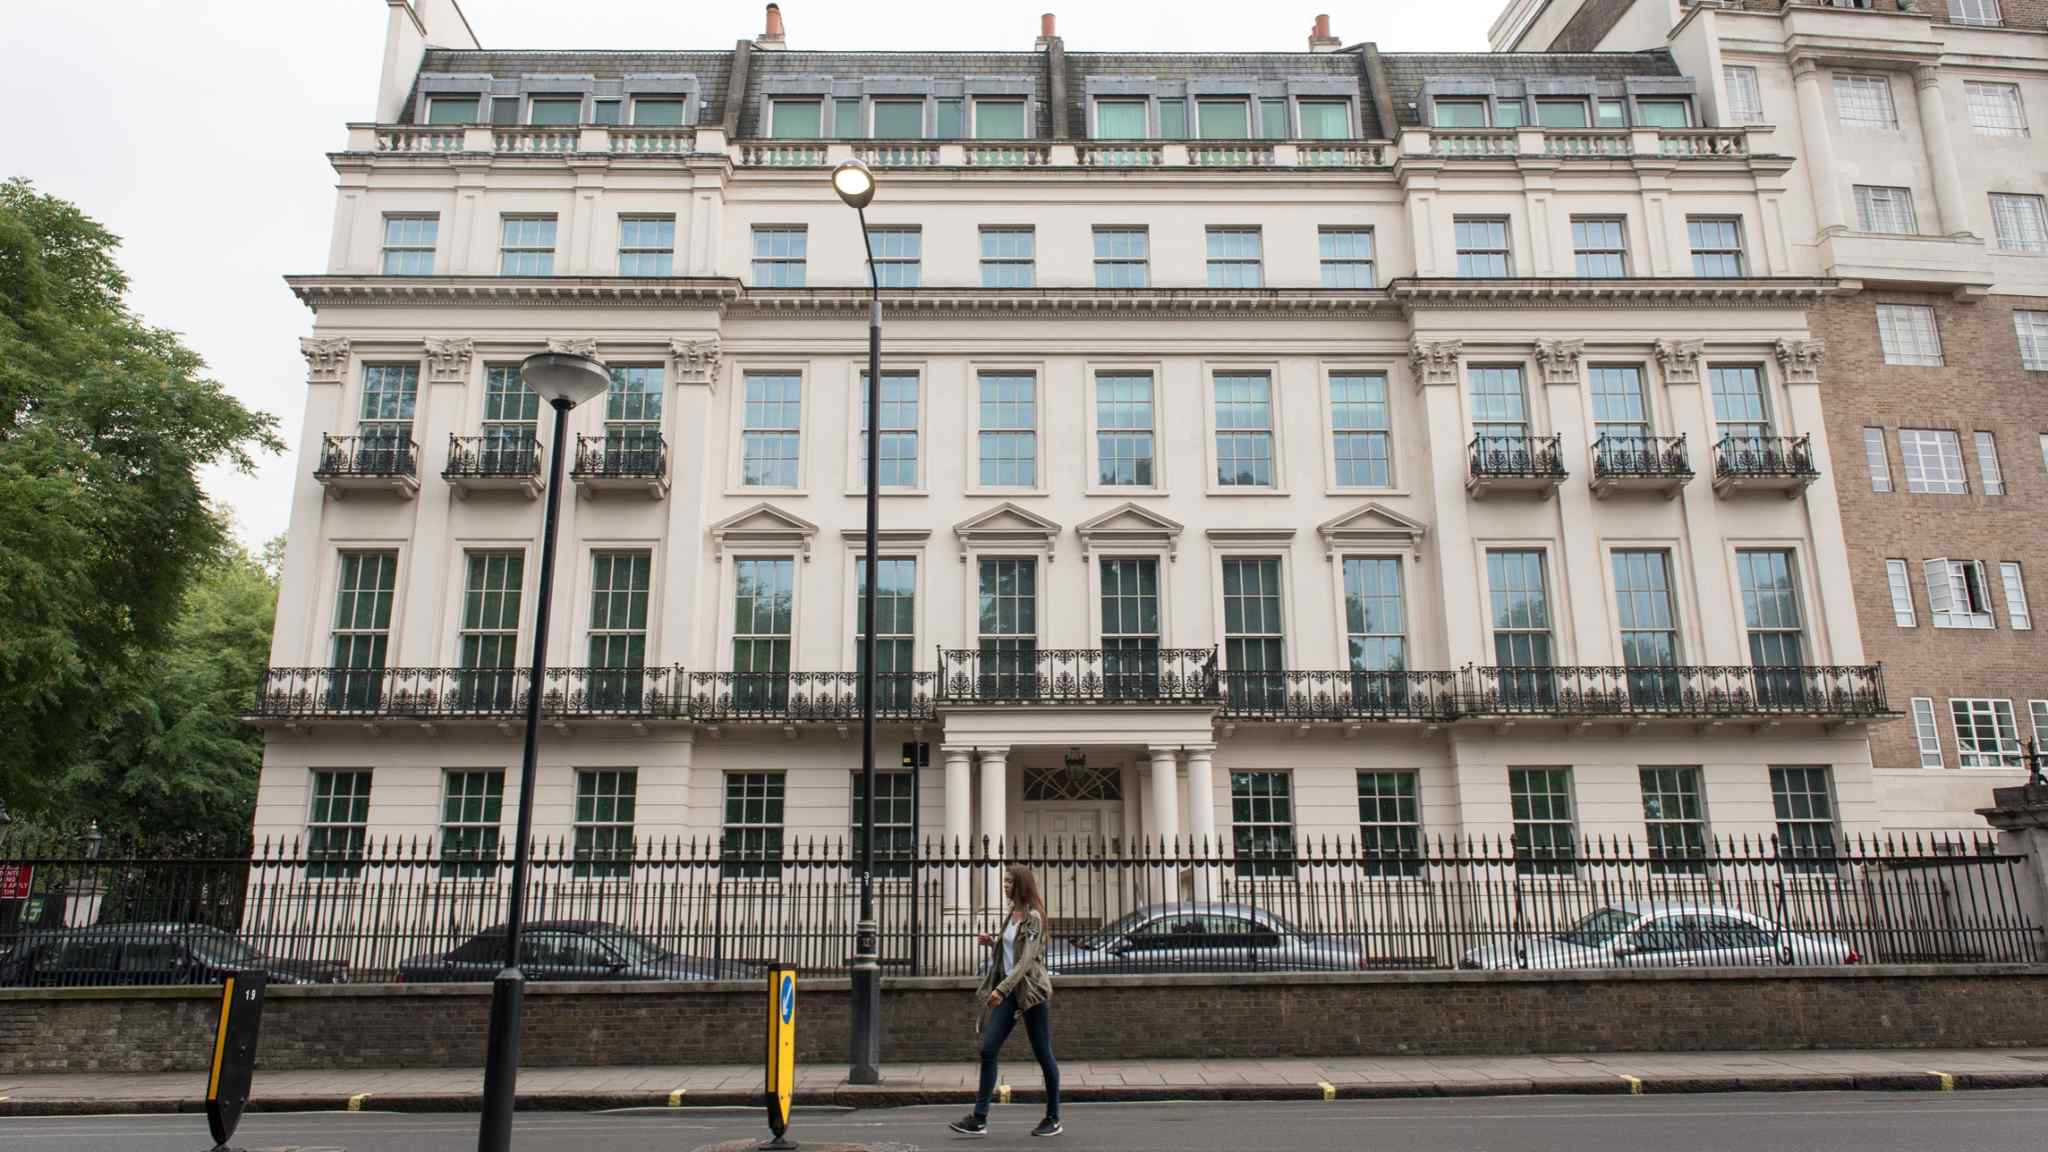 London’s most expensive home ‘owned by Evergrande founder’